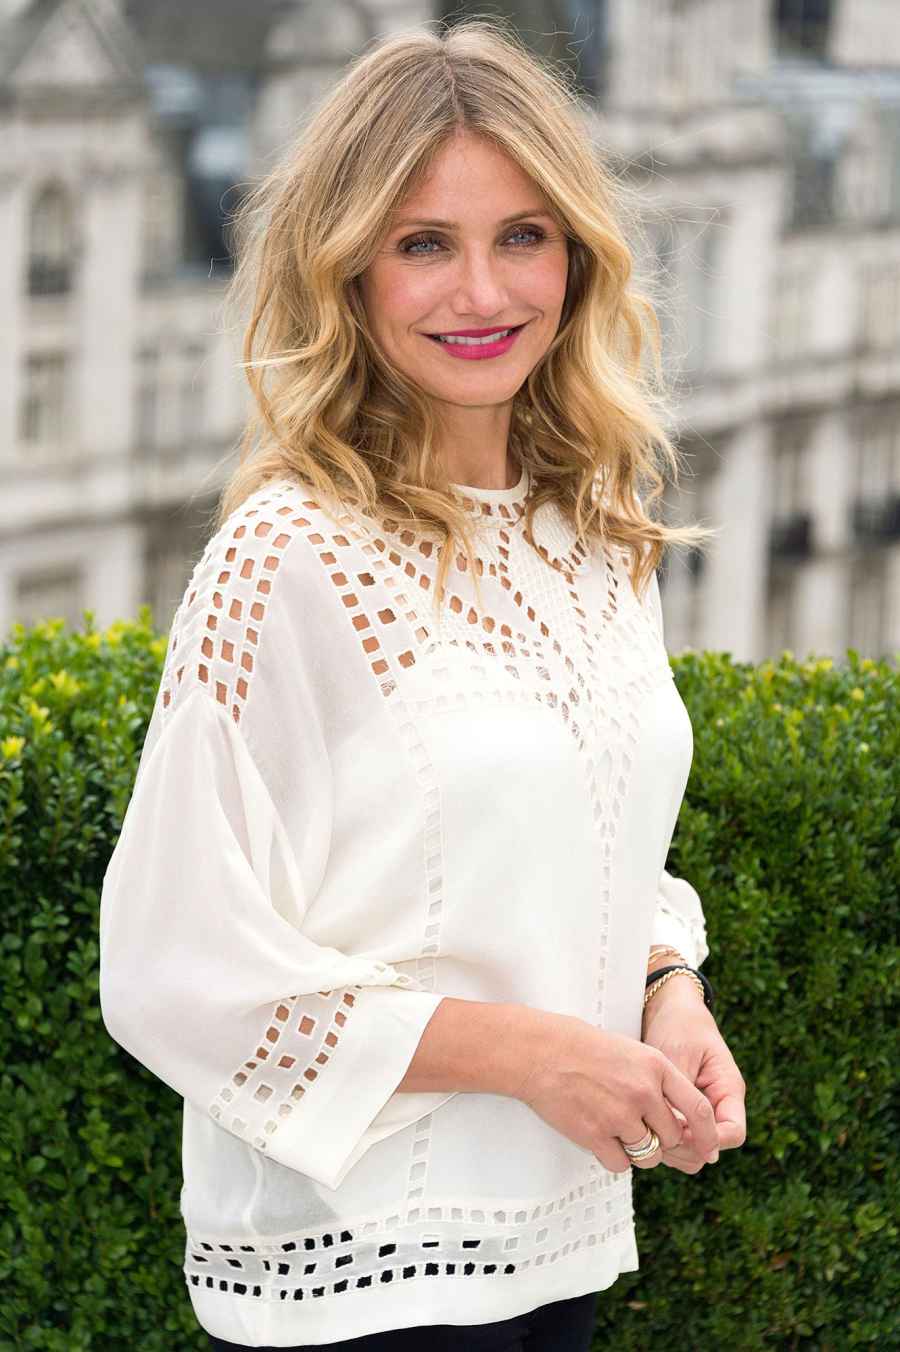 Cameron Diaz’s Sweetest Quotes About Starting a Family